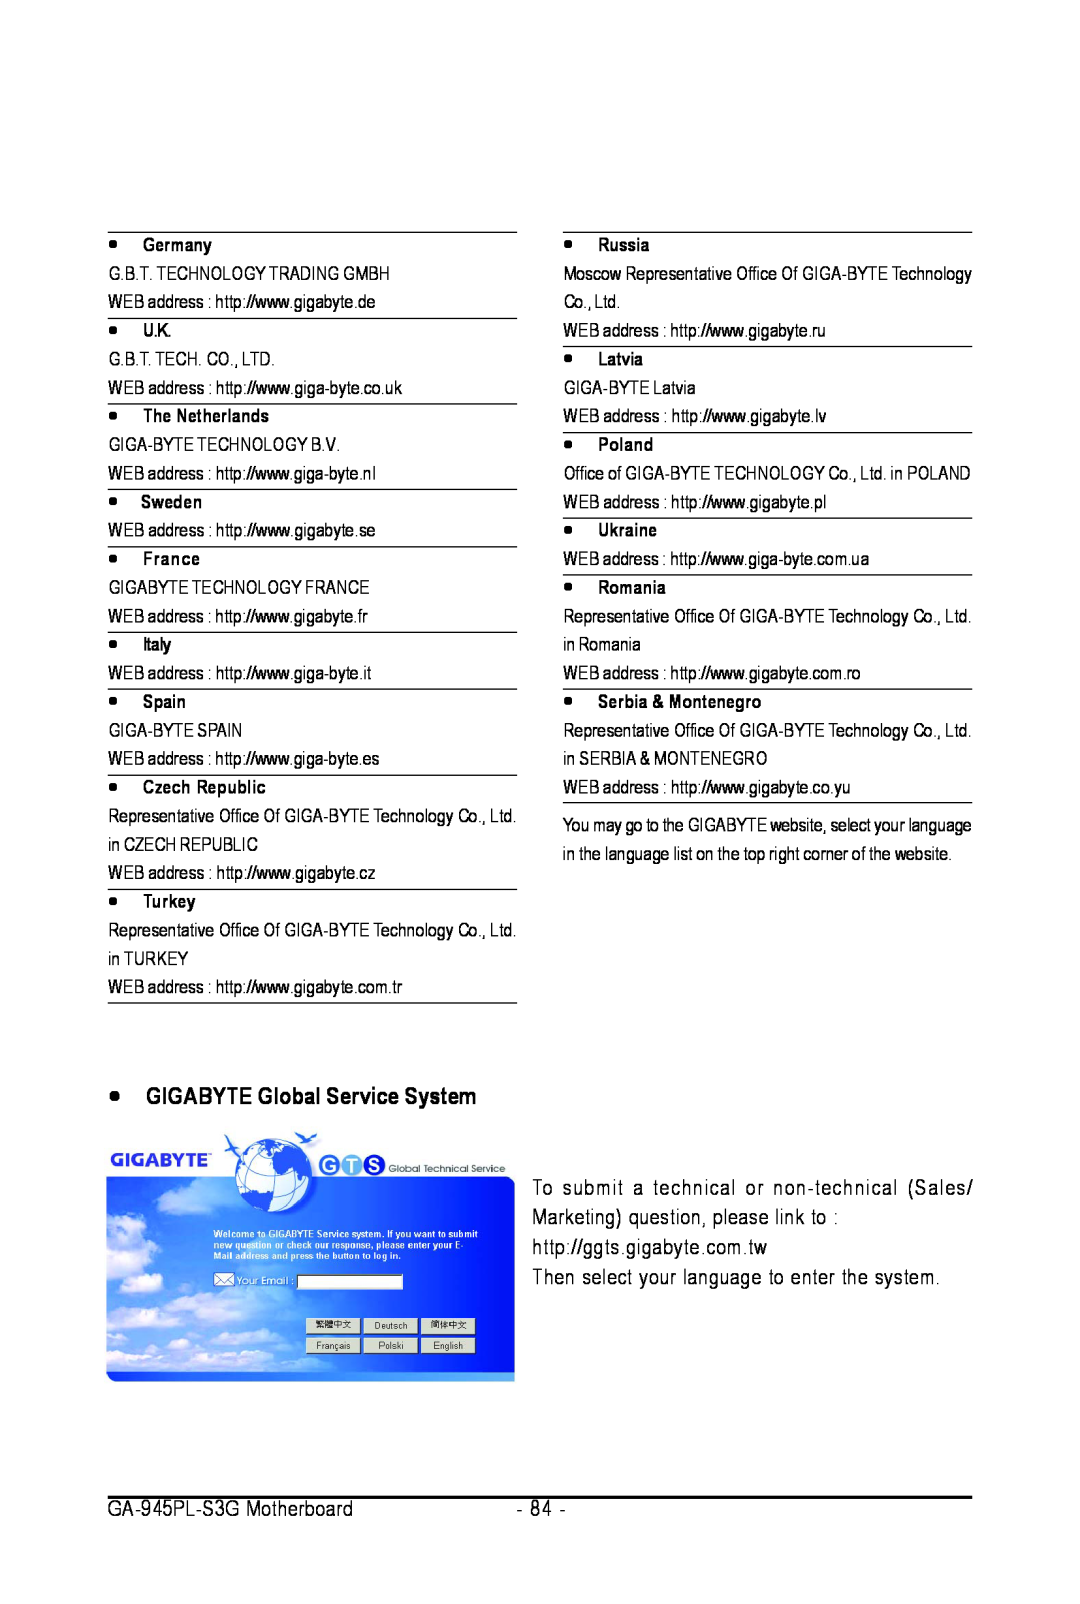 Intel user manual GIGABYTE Global Service System, Then select your language to enter the system, GA-945PL-S3GMotherboard 